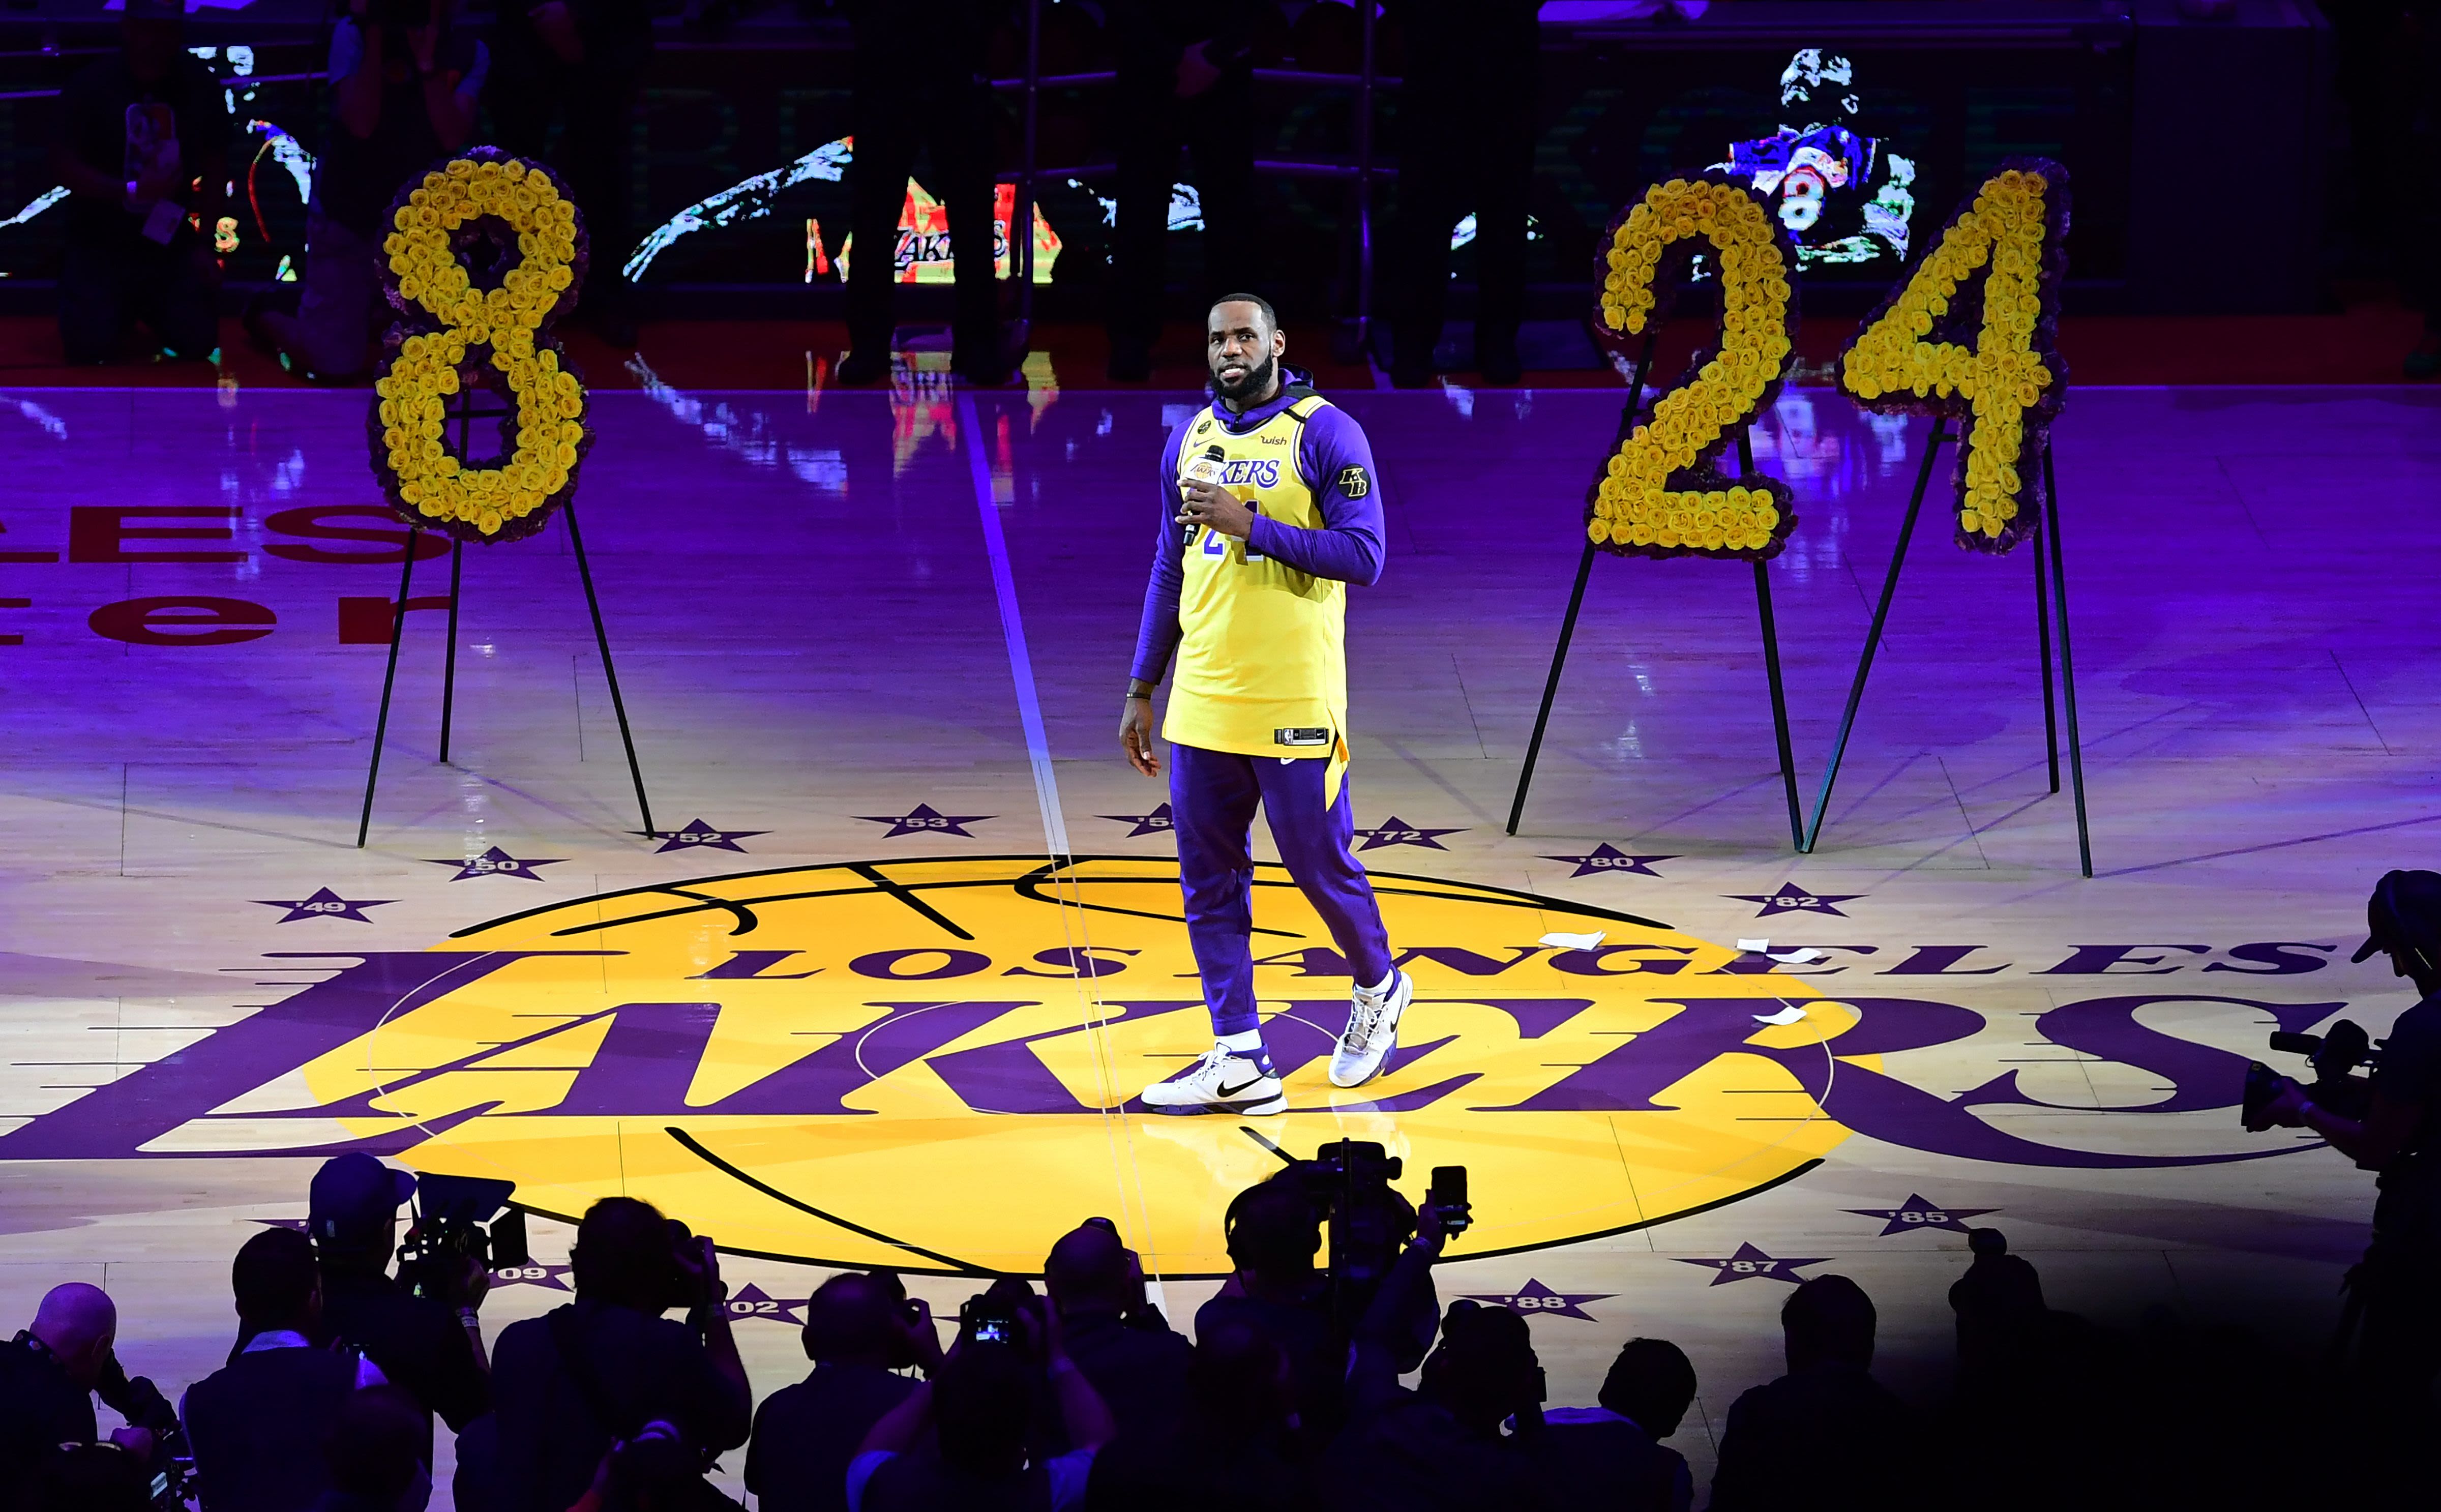 Lakers: Black Mamba jerseys for Game 5 means Heat could be in trouble